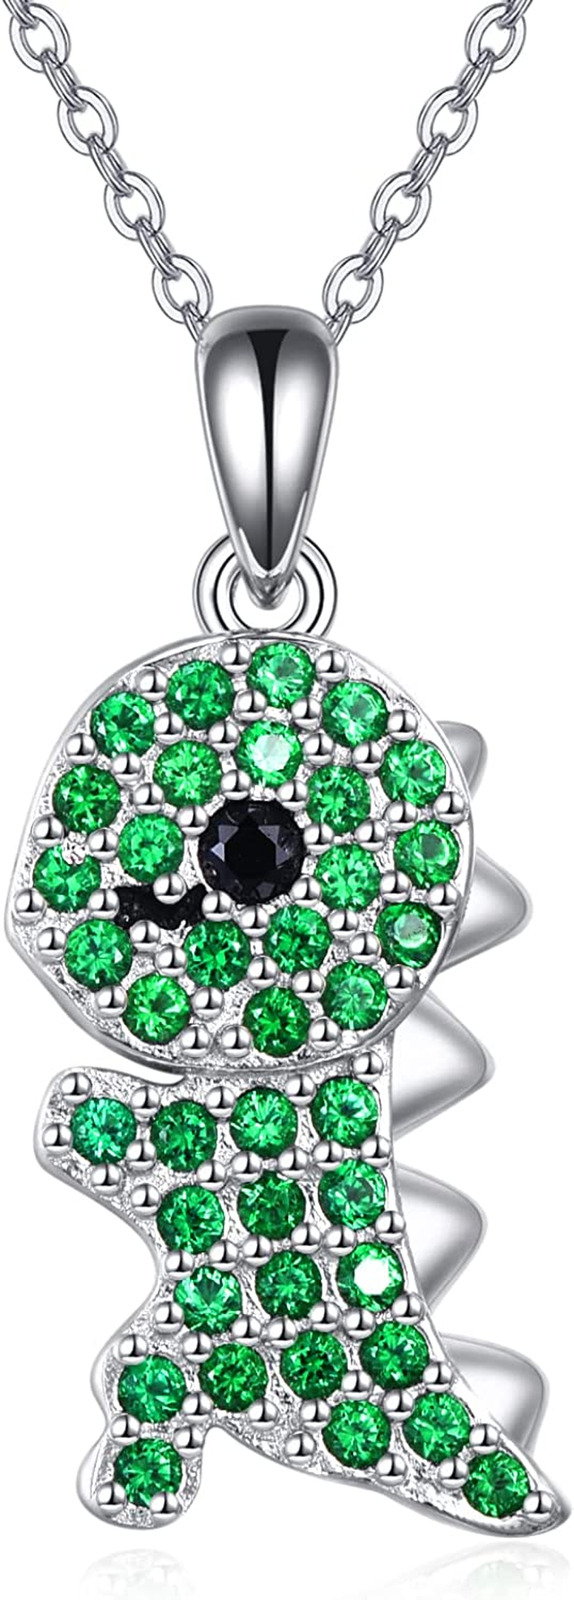 Sterling Silver Green CZ Dinosaur Pendant Necklaces Jewelry Gifts for Women 20"